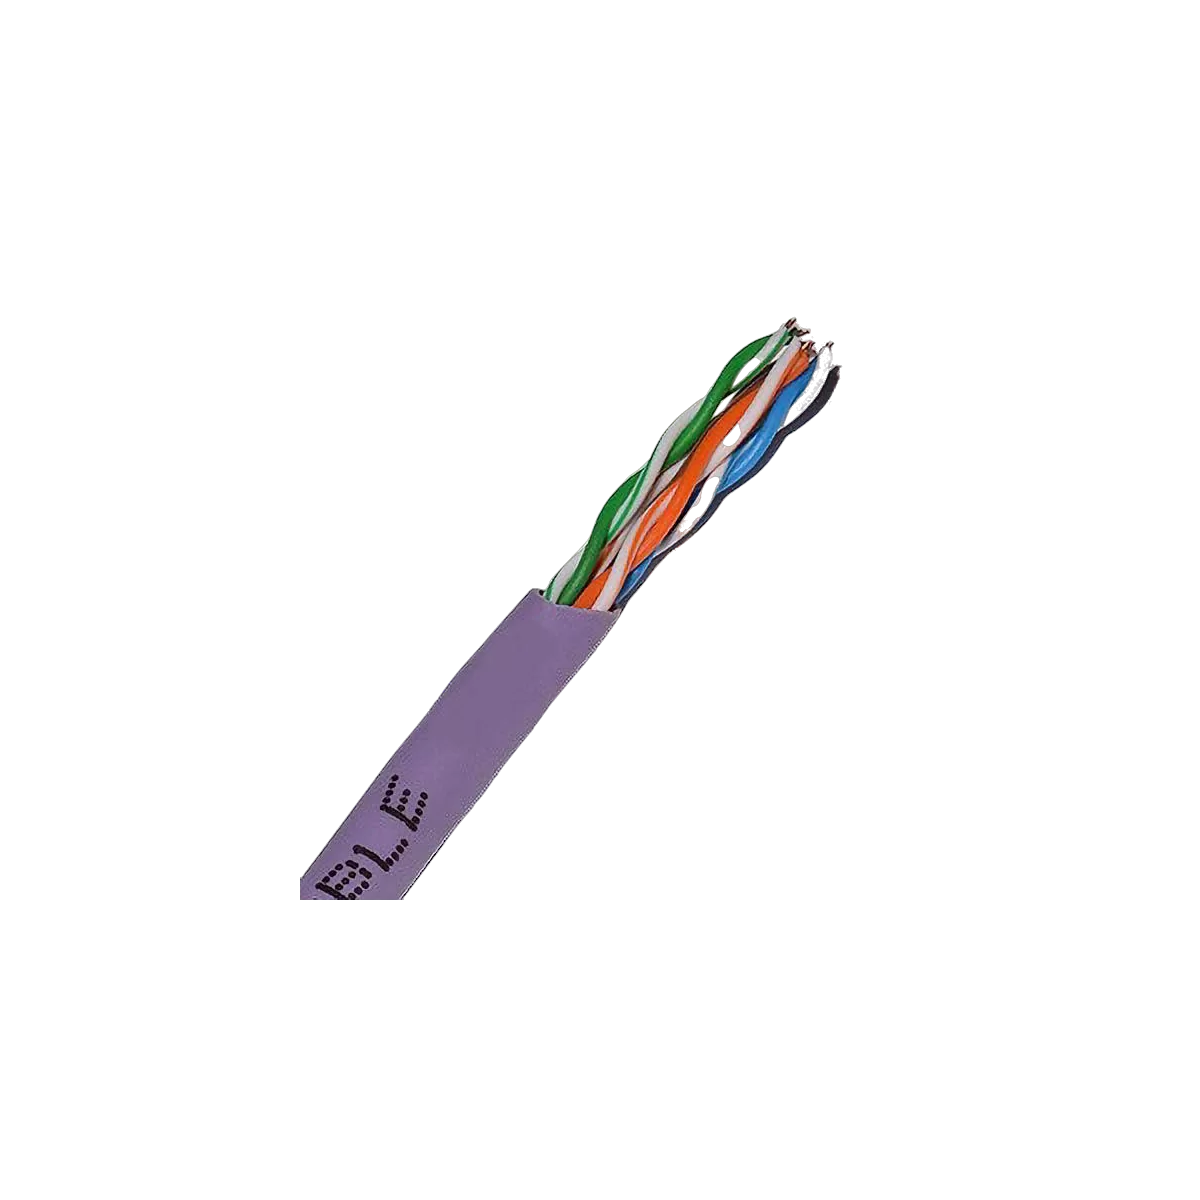 https://shop4electrical.co.uk/659744-zoom_default/cat6-lsf-purple-utp-category-6-enhanced-solid-copper-low-smoke-fumes-lsf-data-networking-cable-305m-box.webp